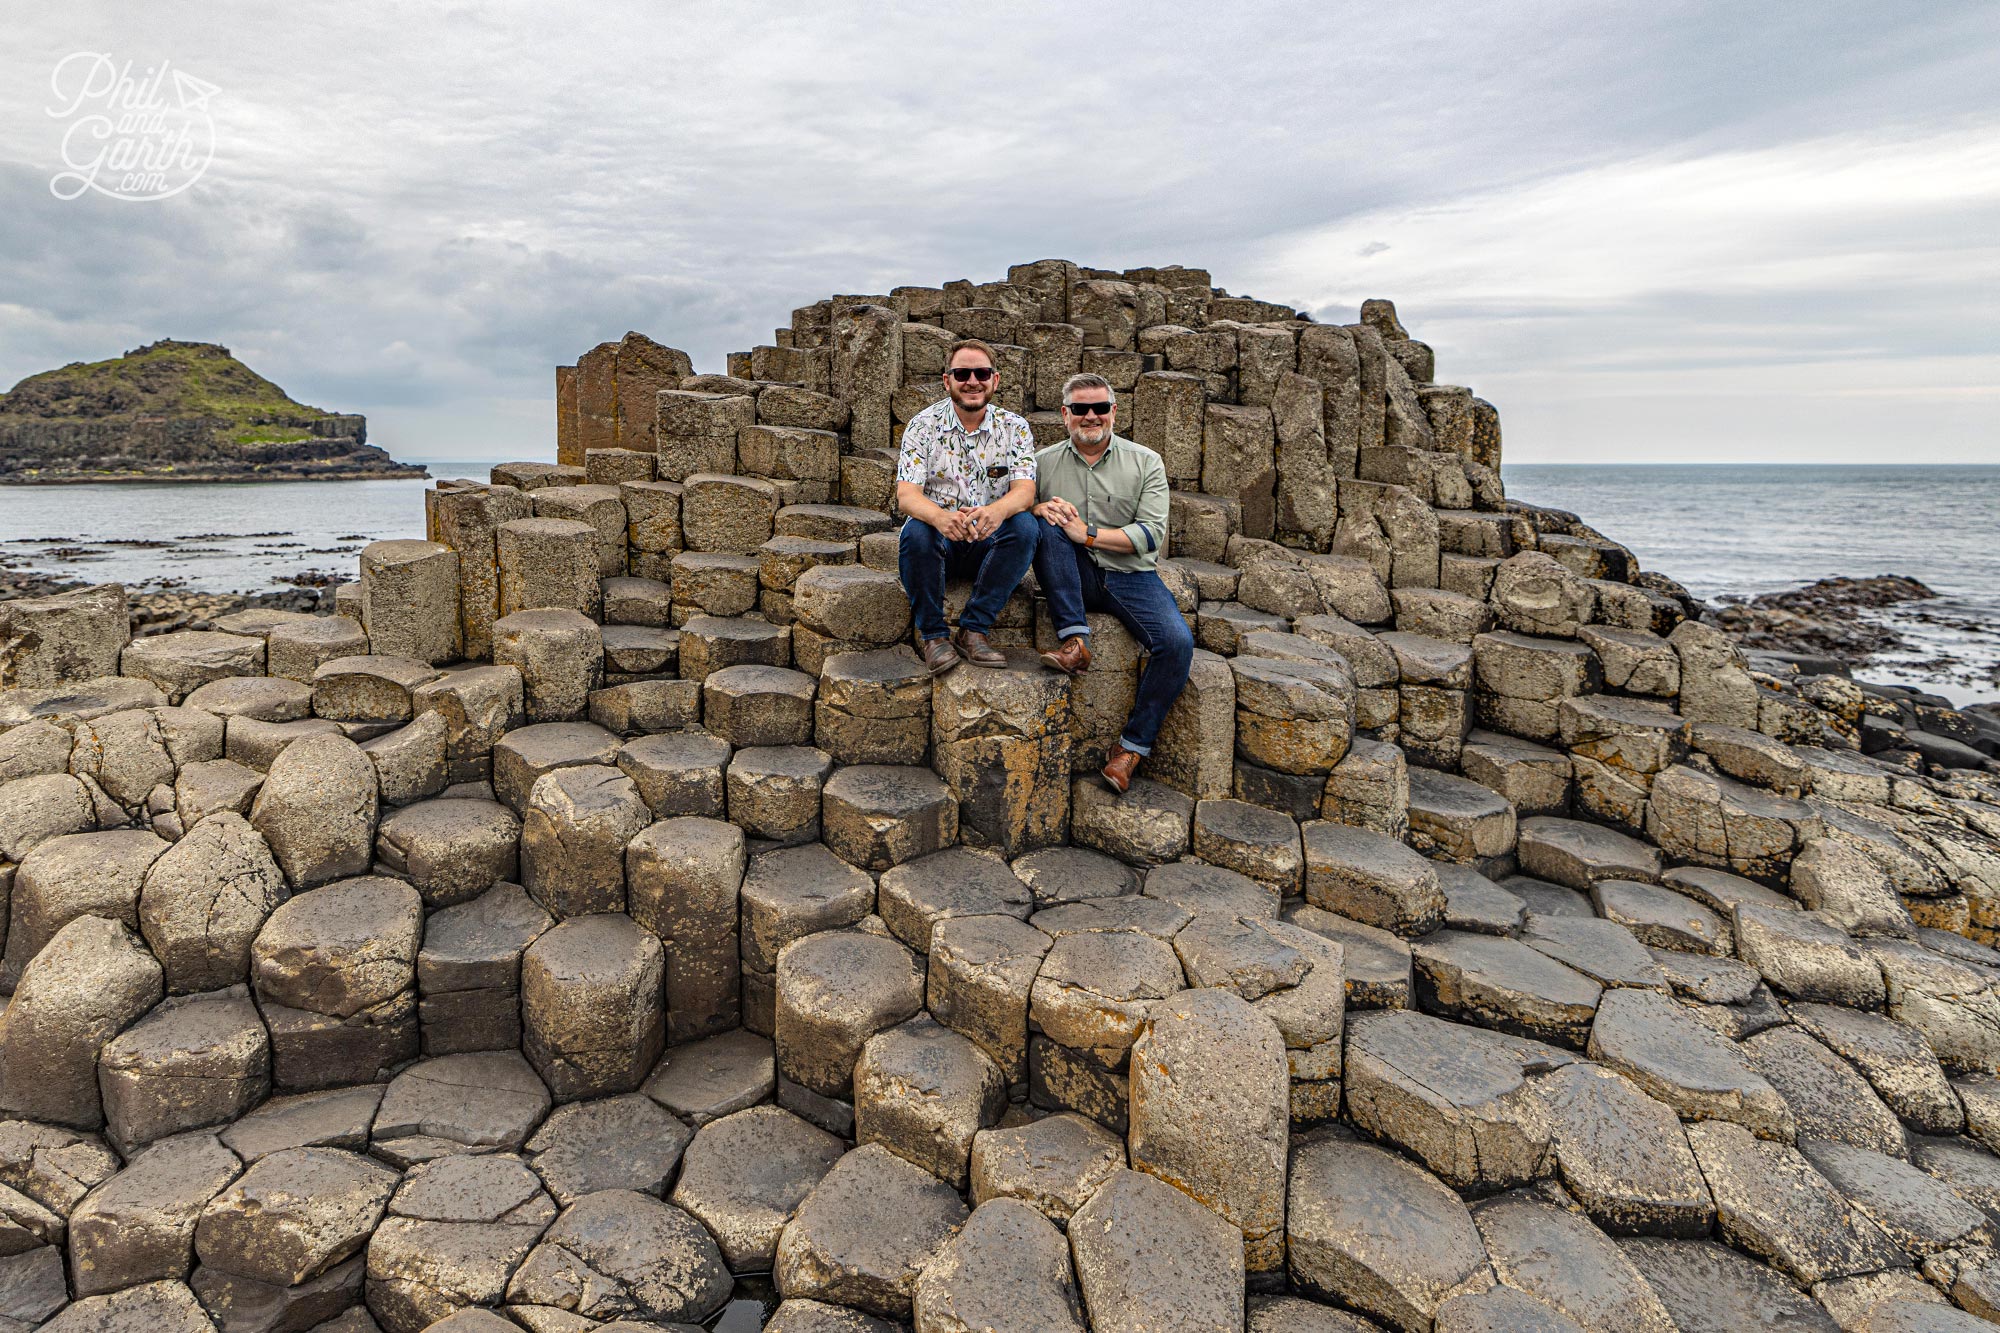 The Giant’s Causeway is the only UNESCO world heritage site in Northern Ireland